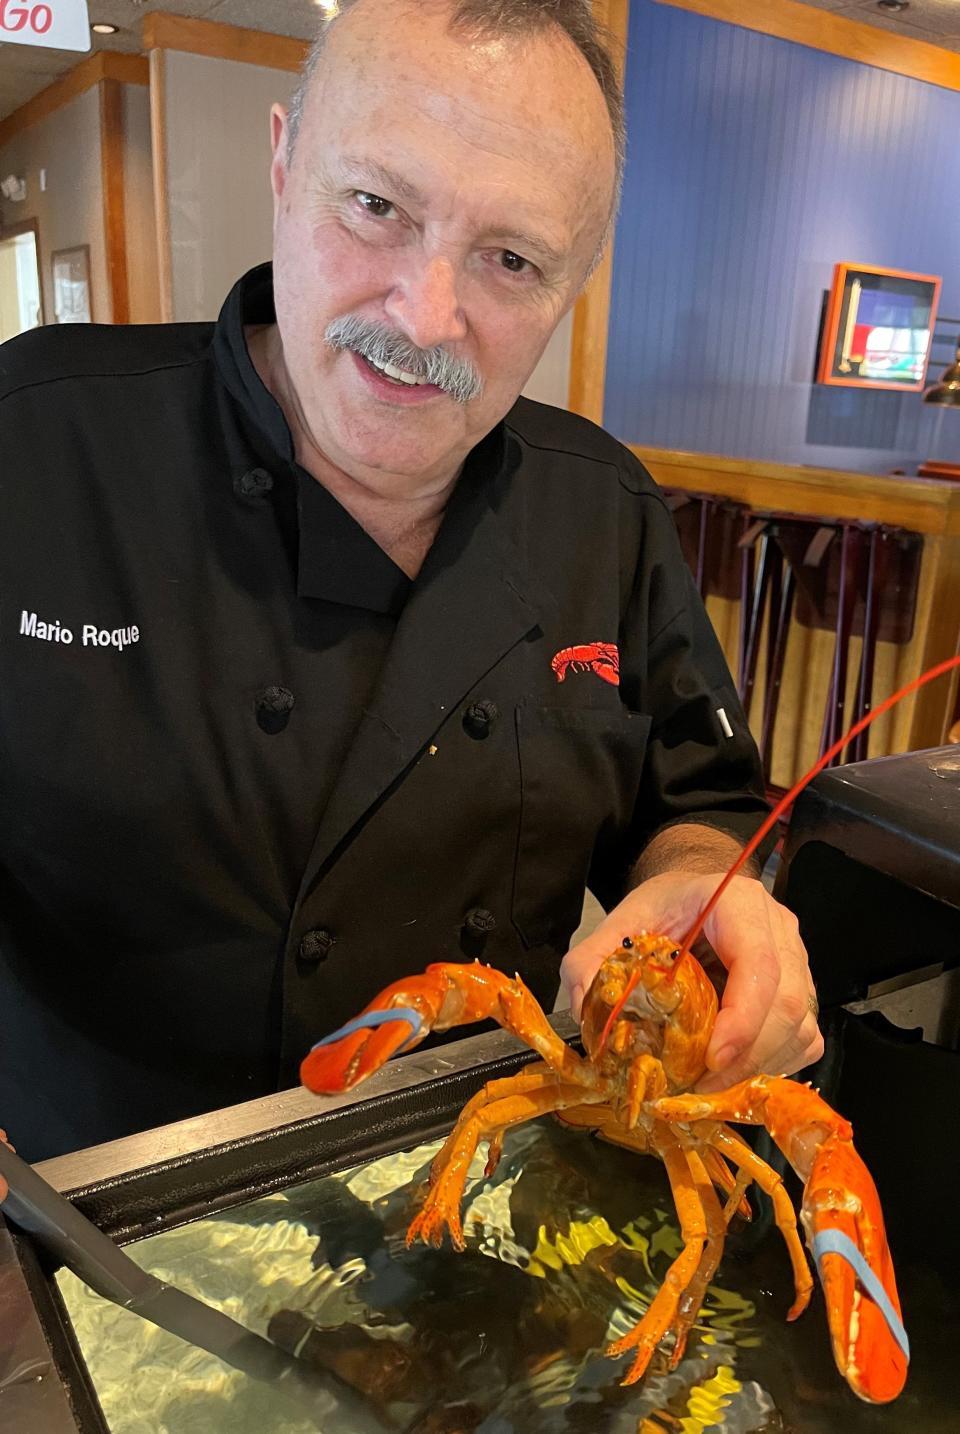 Cheddar, a rare orange lobster, was saved by employees at a Red Lobster restaurant in Florida and transported to an aquarium in South Carolina.